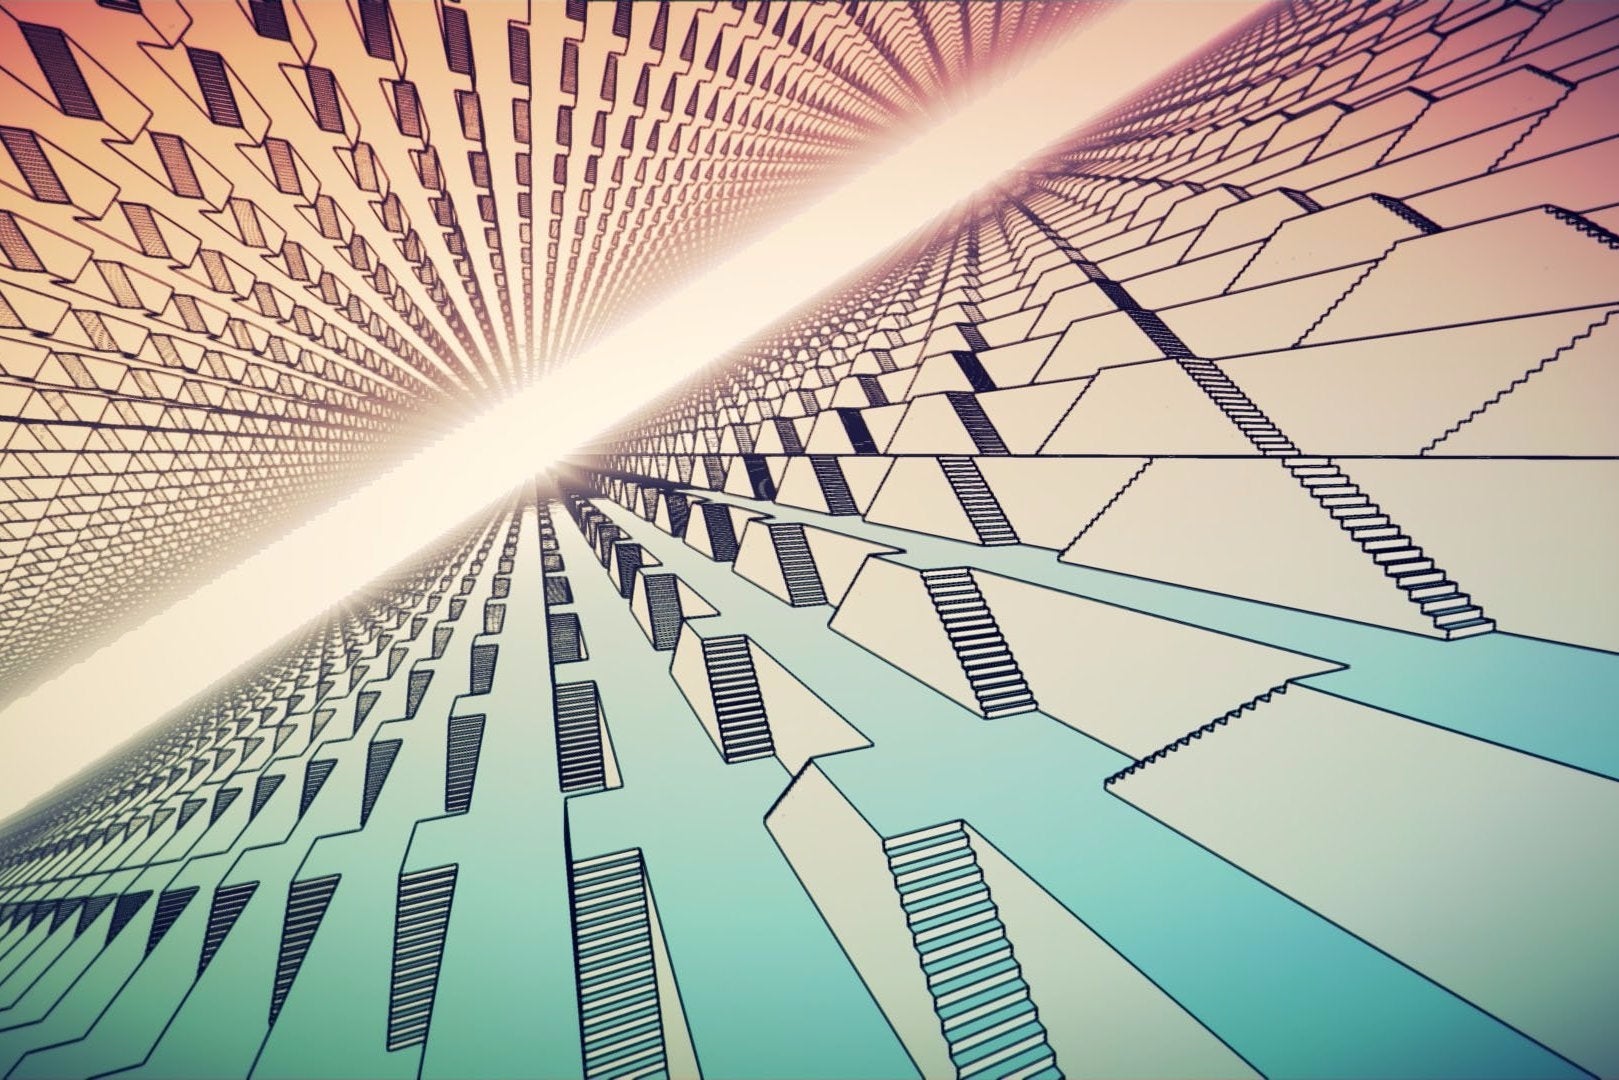 Image for Manifold Garden is one stylish Escher-inspired puzzler